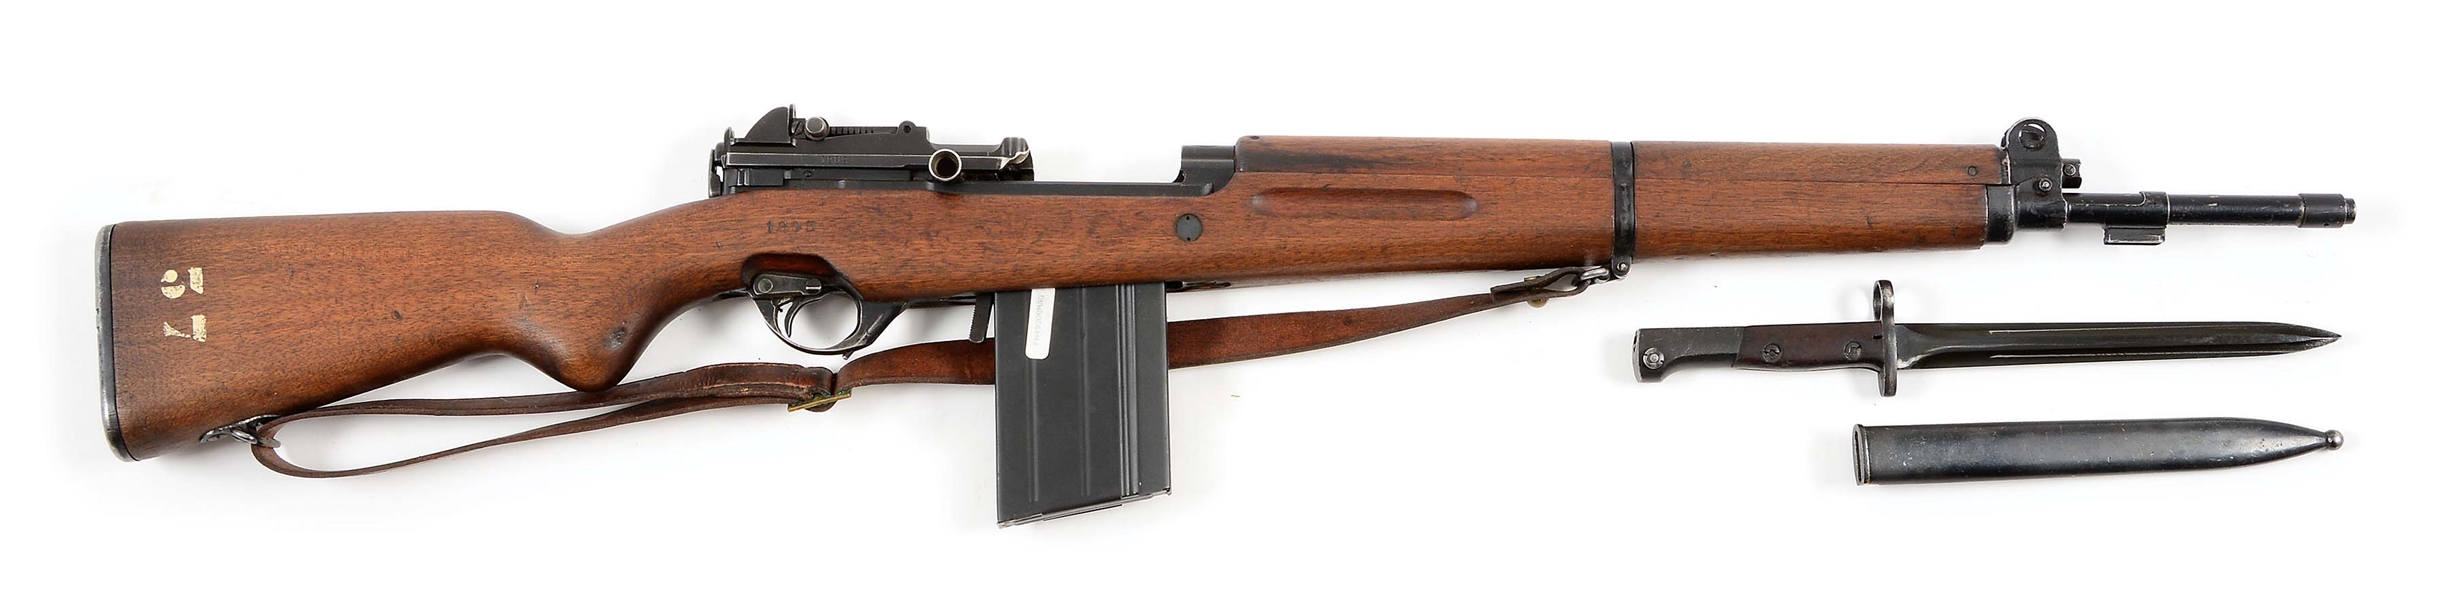 (C) ARGENTINE NAVY CONTRACT FN-49 SEMI-AUTOMATIC RIFLE.